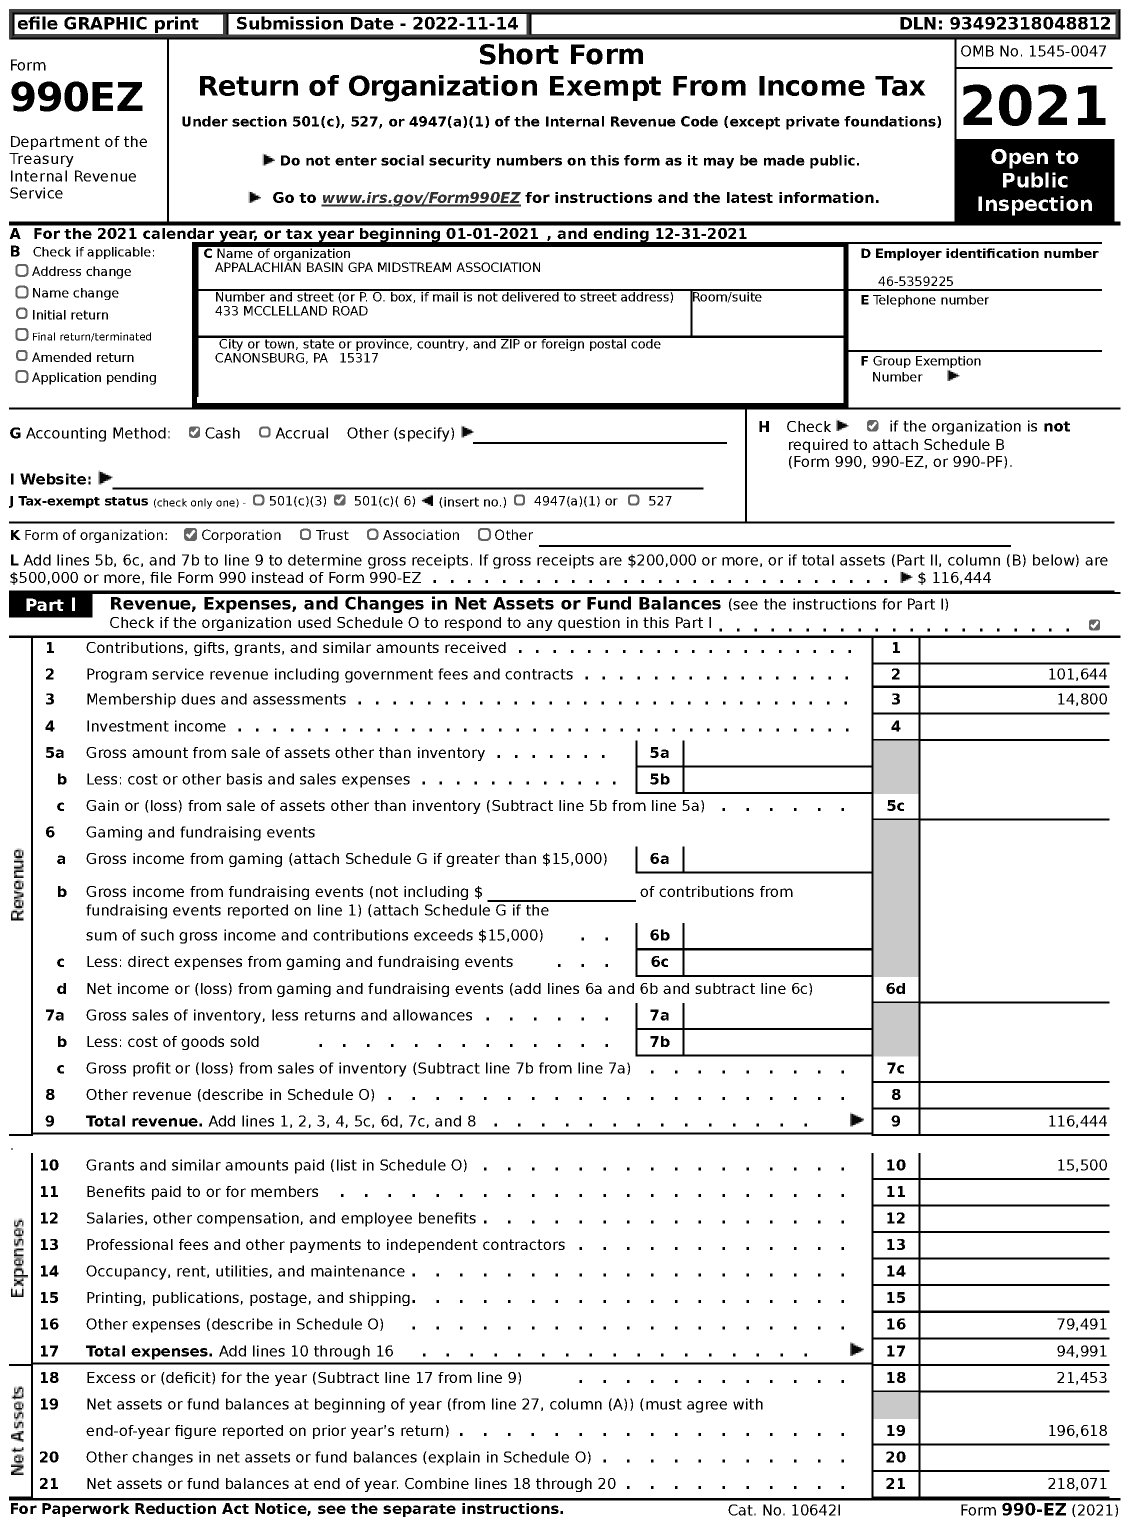 Image of first page of 2021 Form 990EZ for Appalachian Basin Gpa Midstream Association